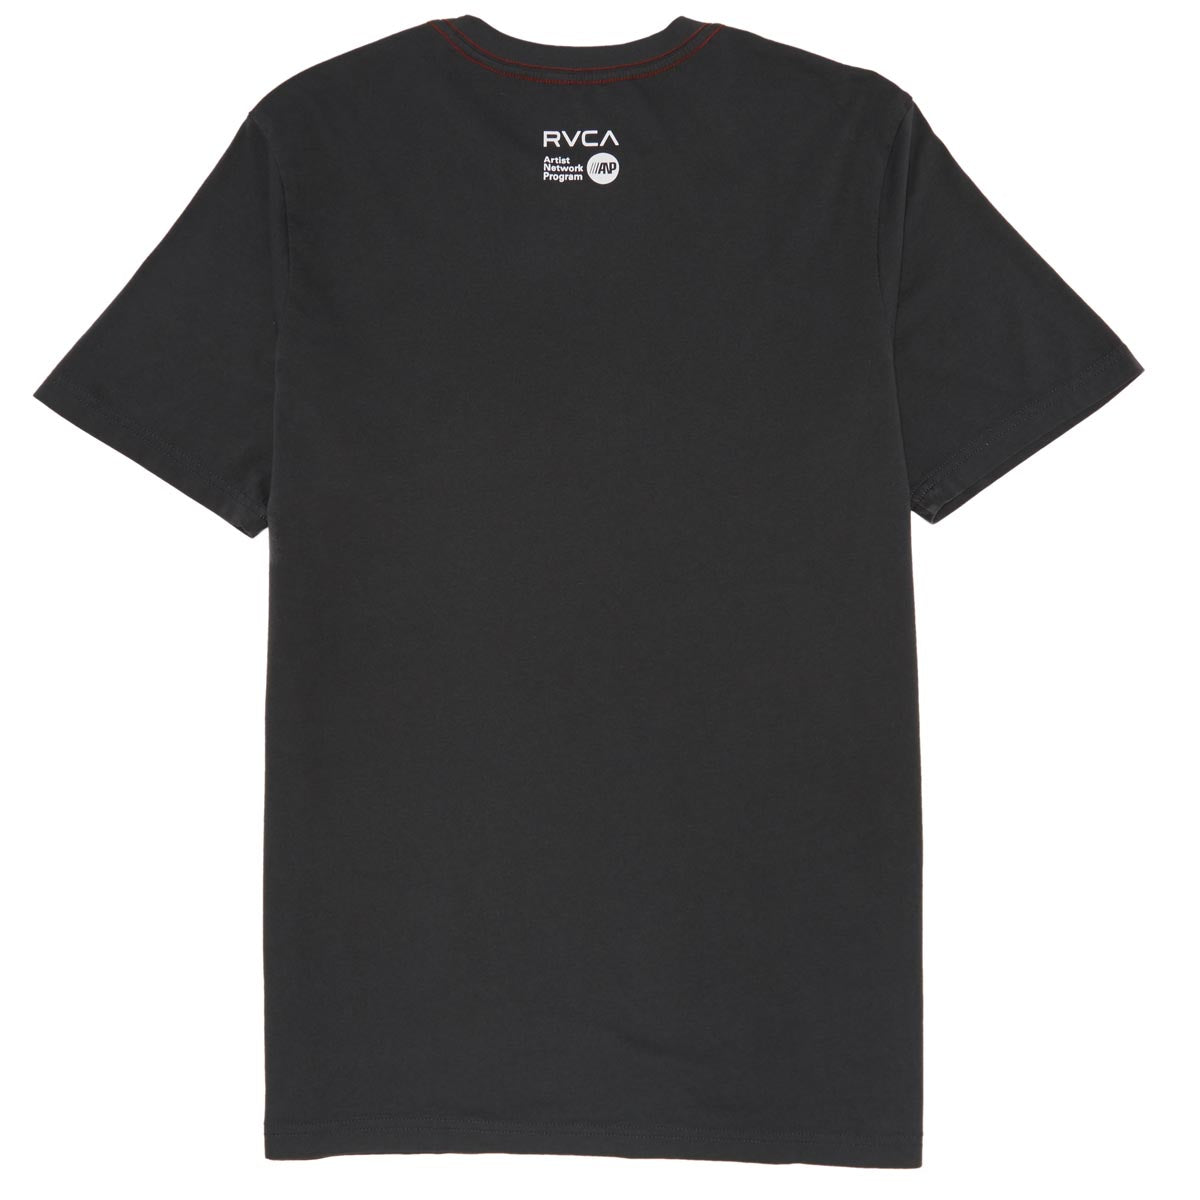 RVCA Cropped Flower T-Shirt - Pirate Black image 2